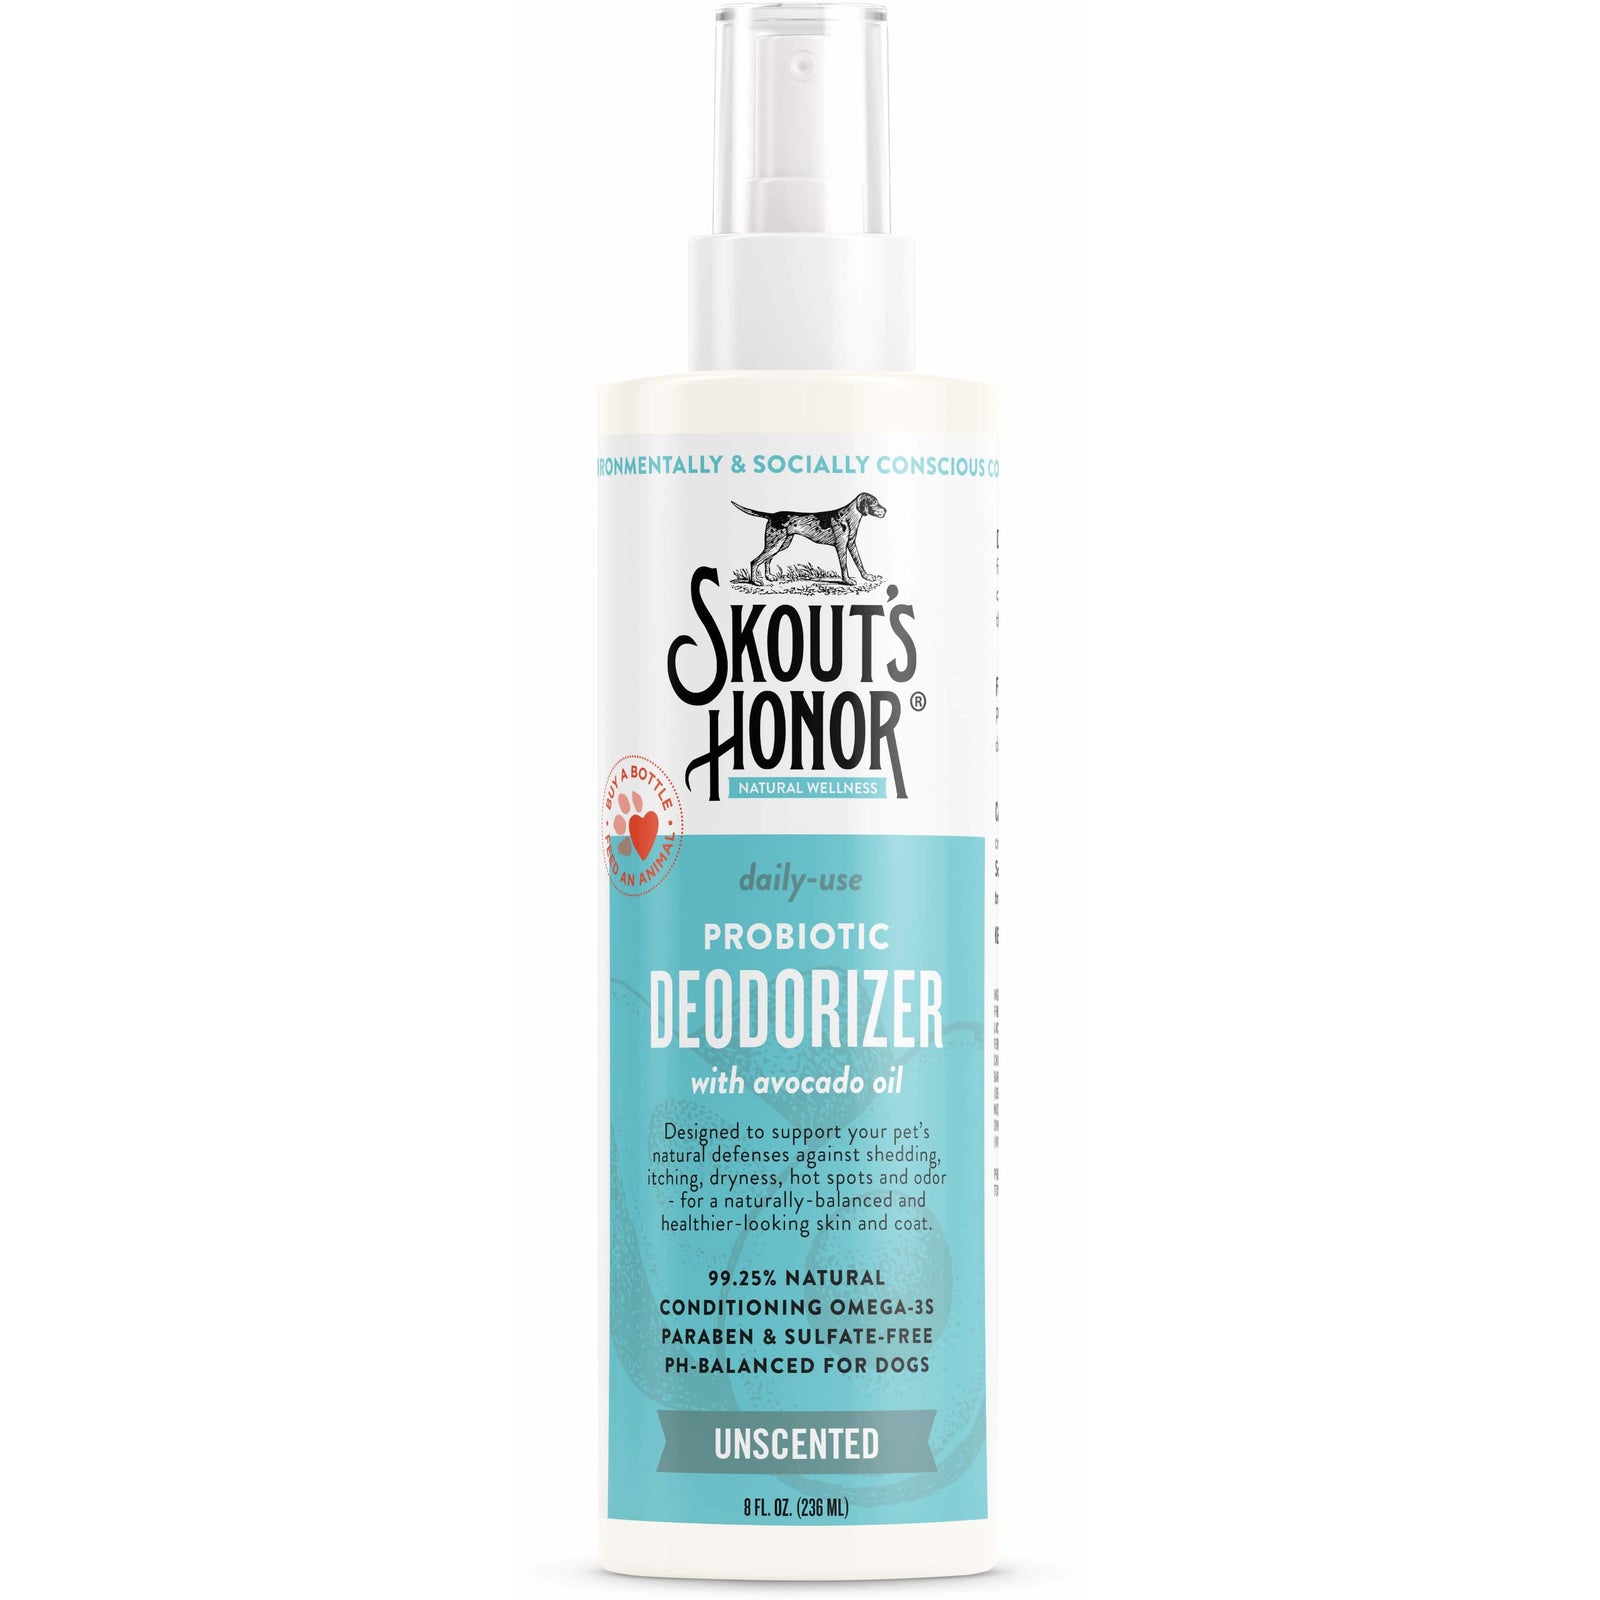 Skout's Honor Probiotic Deodorizer Spray Unscented for Dogs & Cats